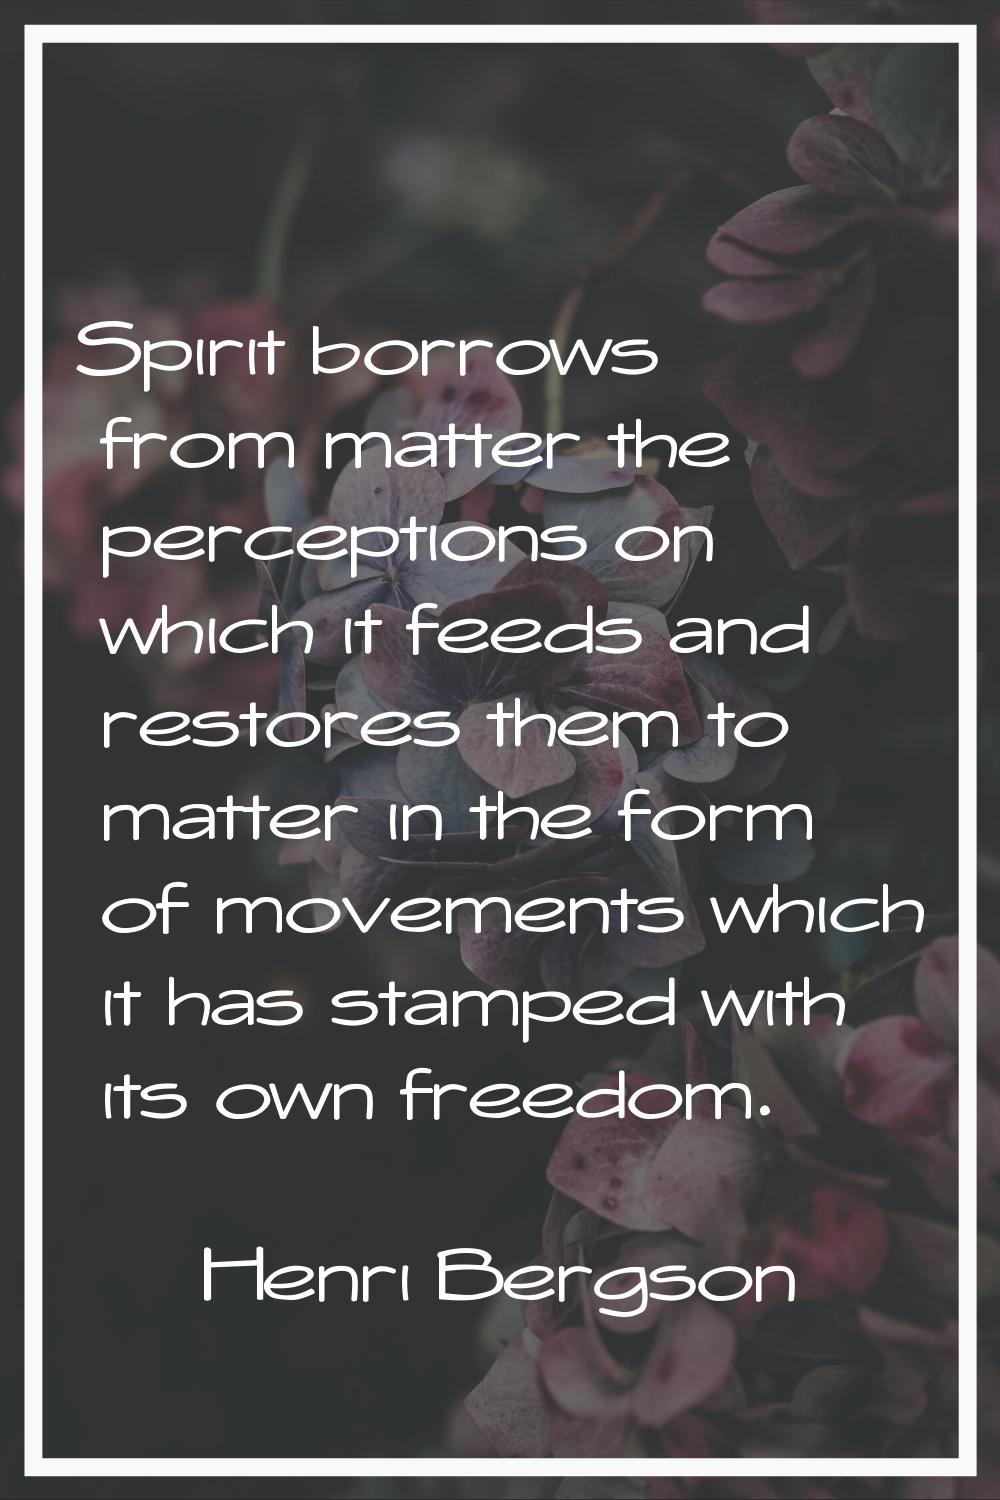 Spirit borrows from matter the perceptions on which it feeds and restores them to matter in the for